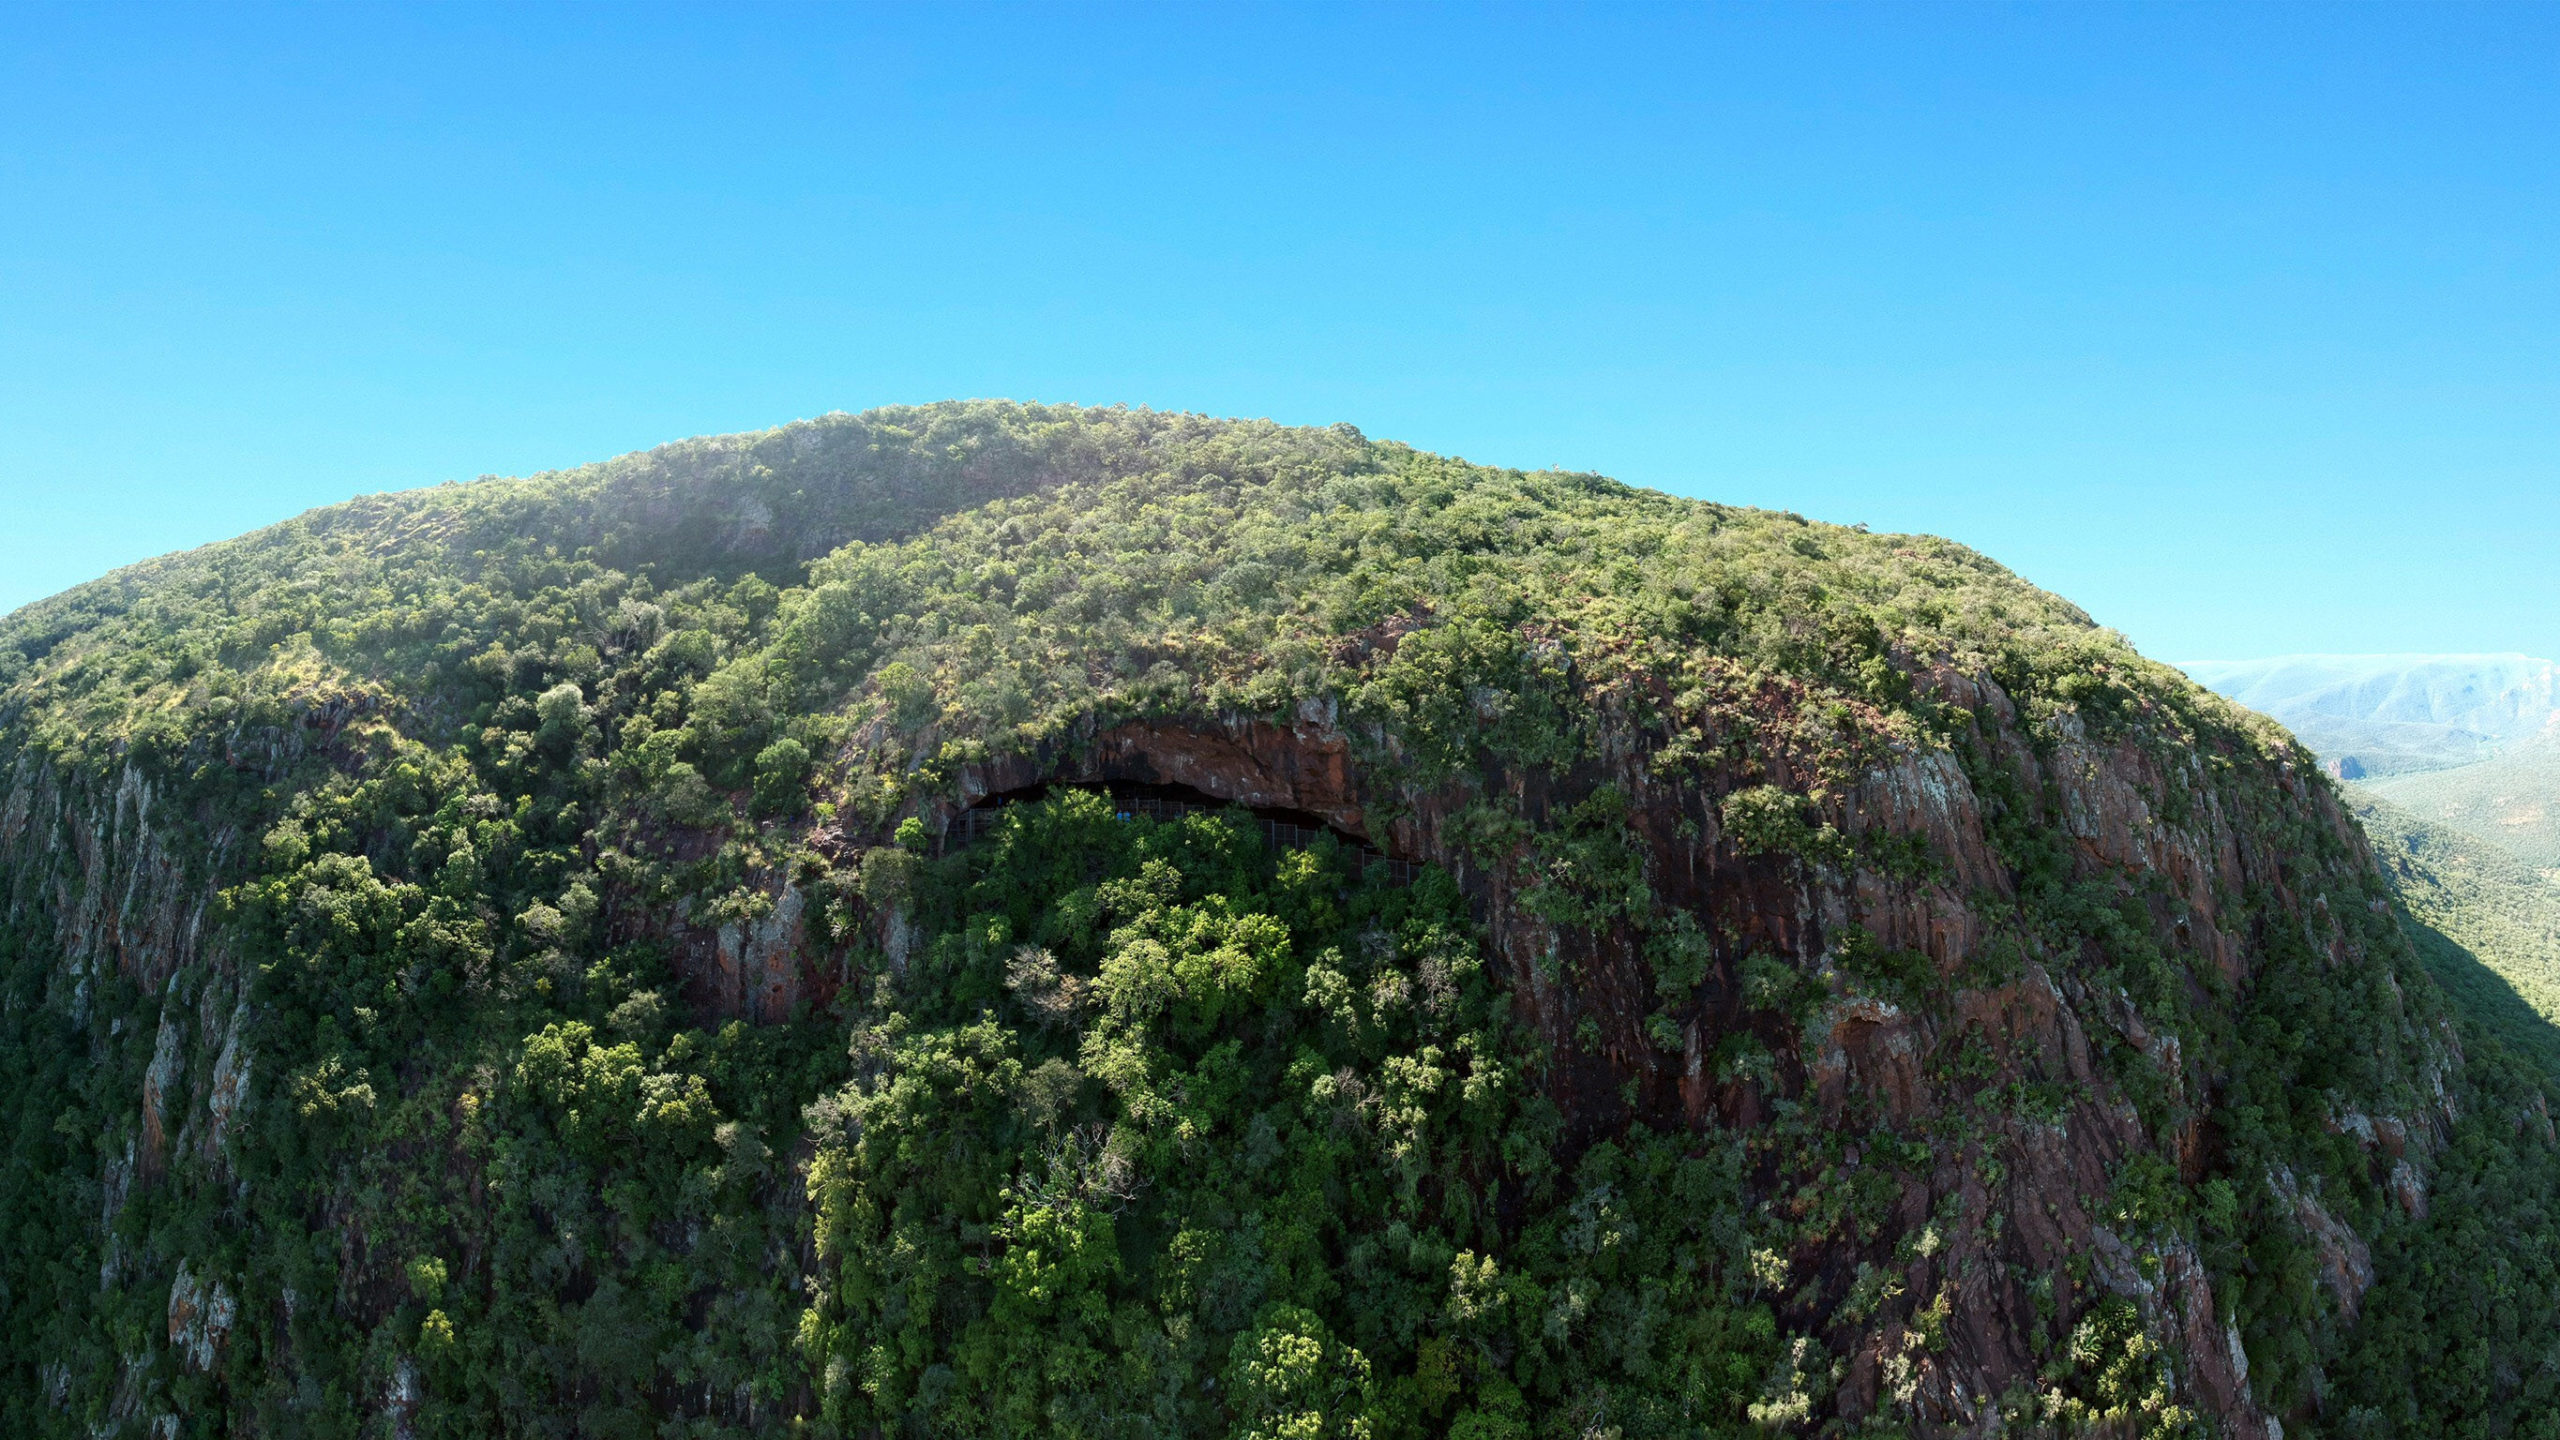 The Border Cave rock shelter in the Lebombo Mountains of southern Africa.  (Image: A. Kruger)